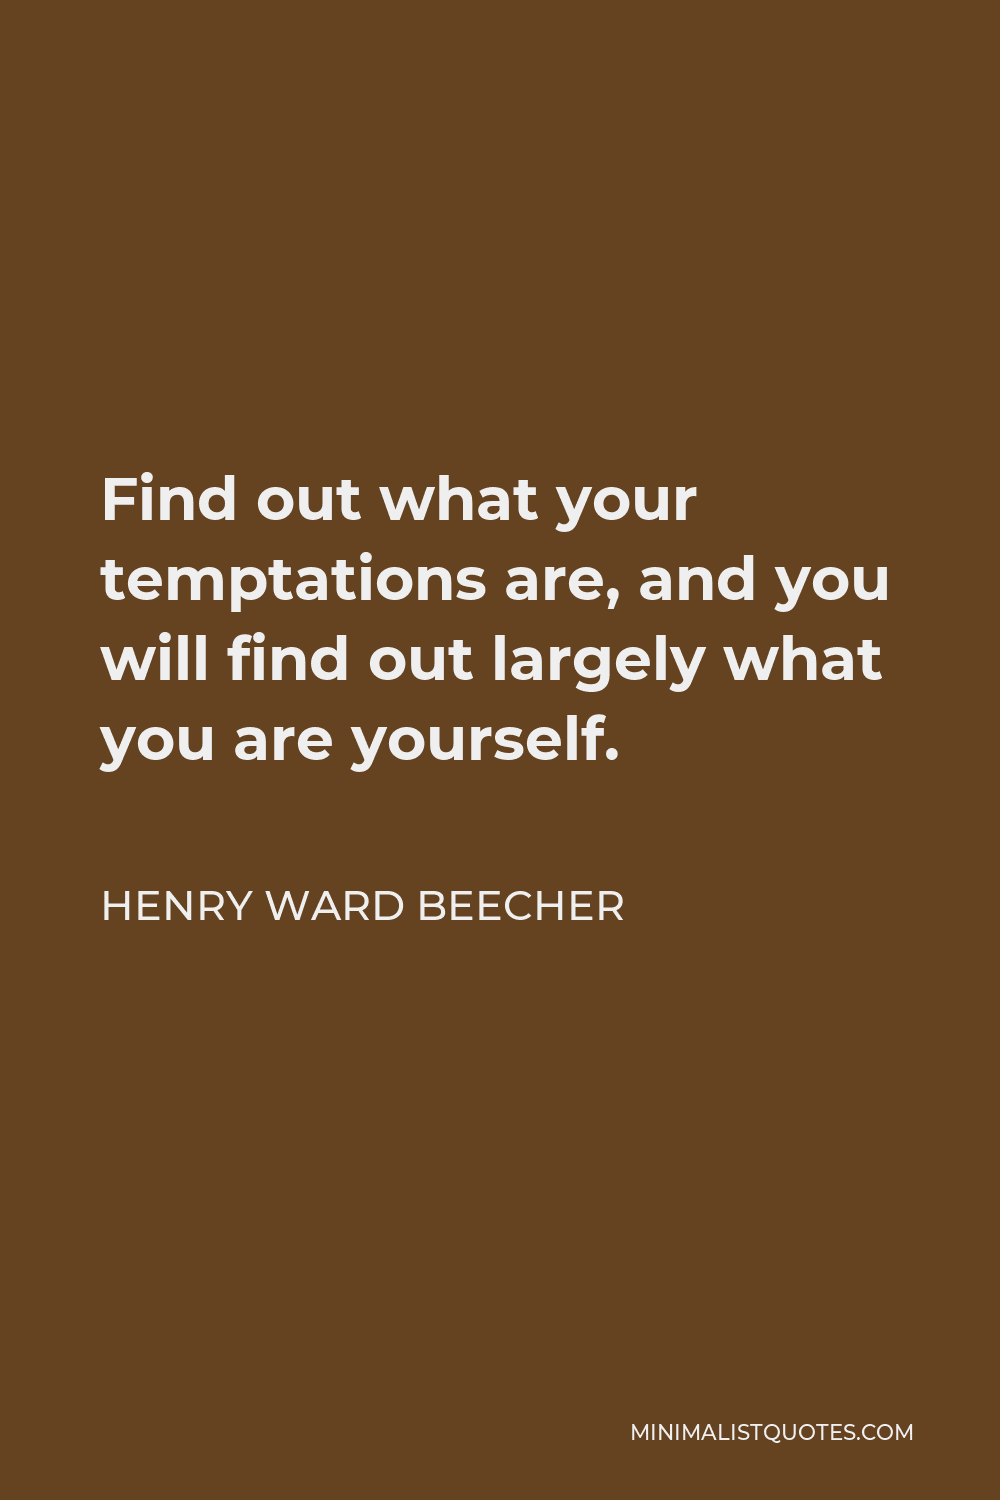 Henry Ward Beecher Quote - Find out what your temptations are, and you will find out largely what you are yourself.